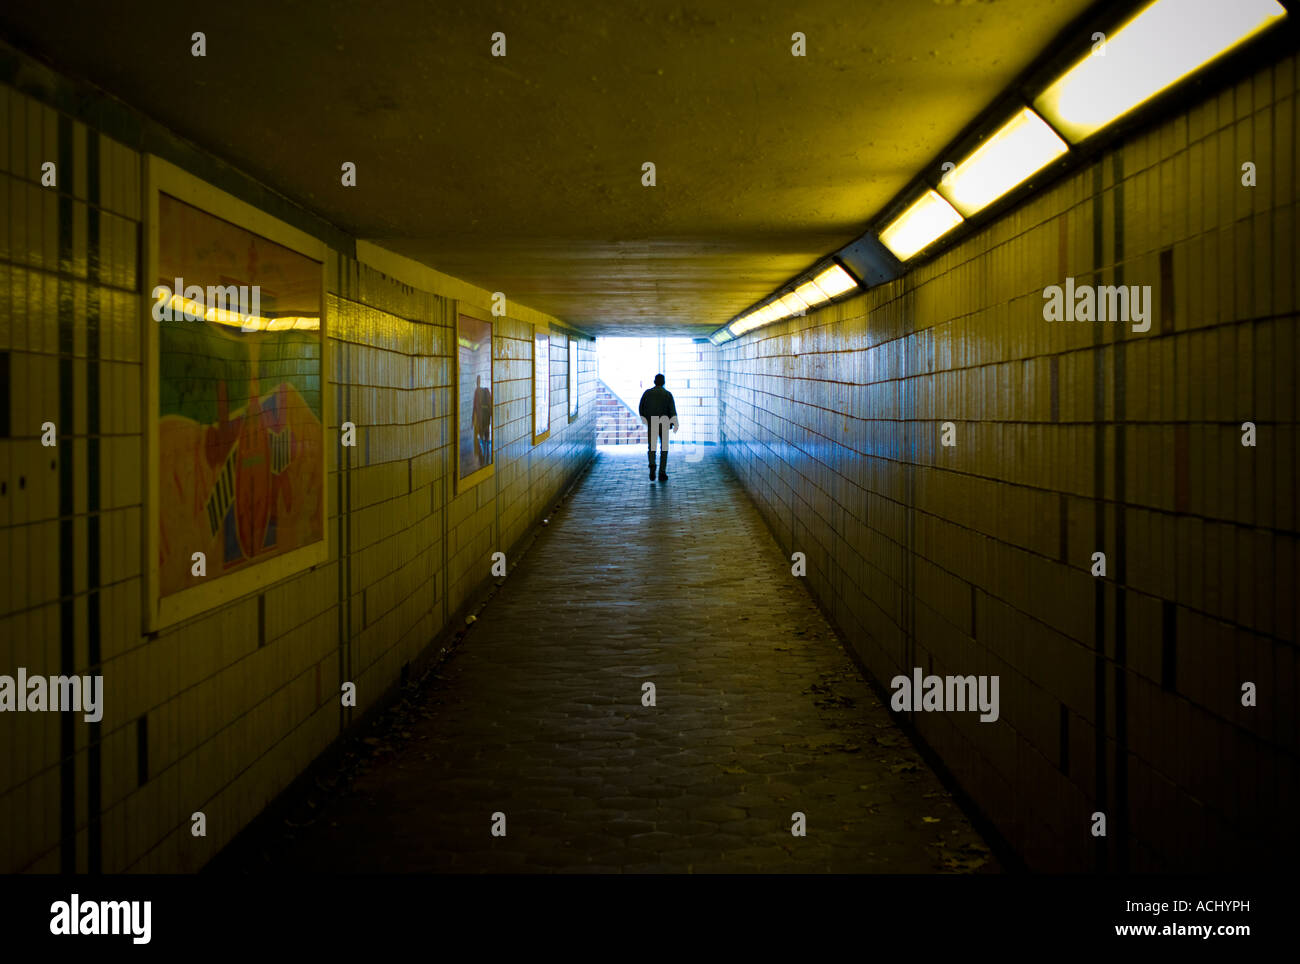 man Person walking alone in underpass subway in a city Stock Photo